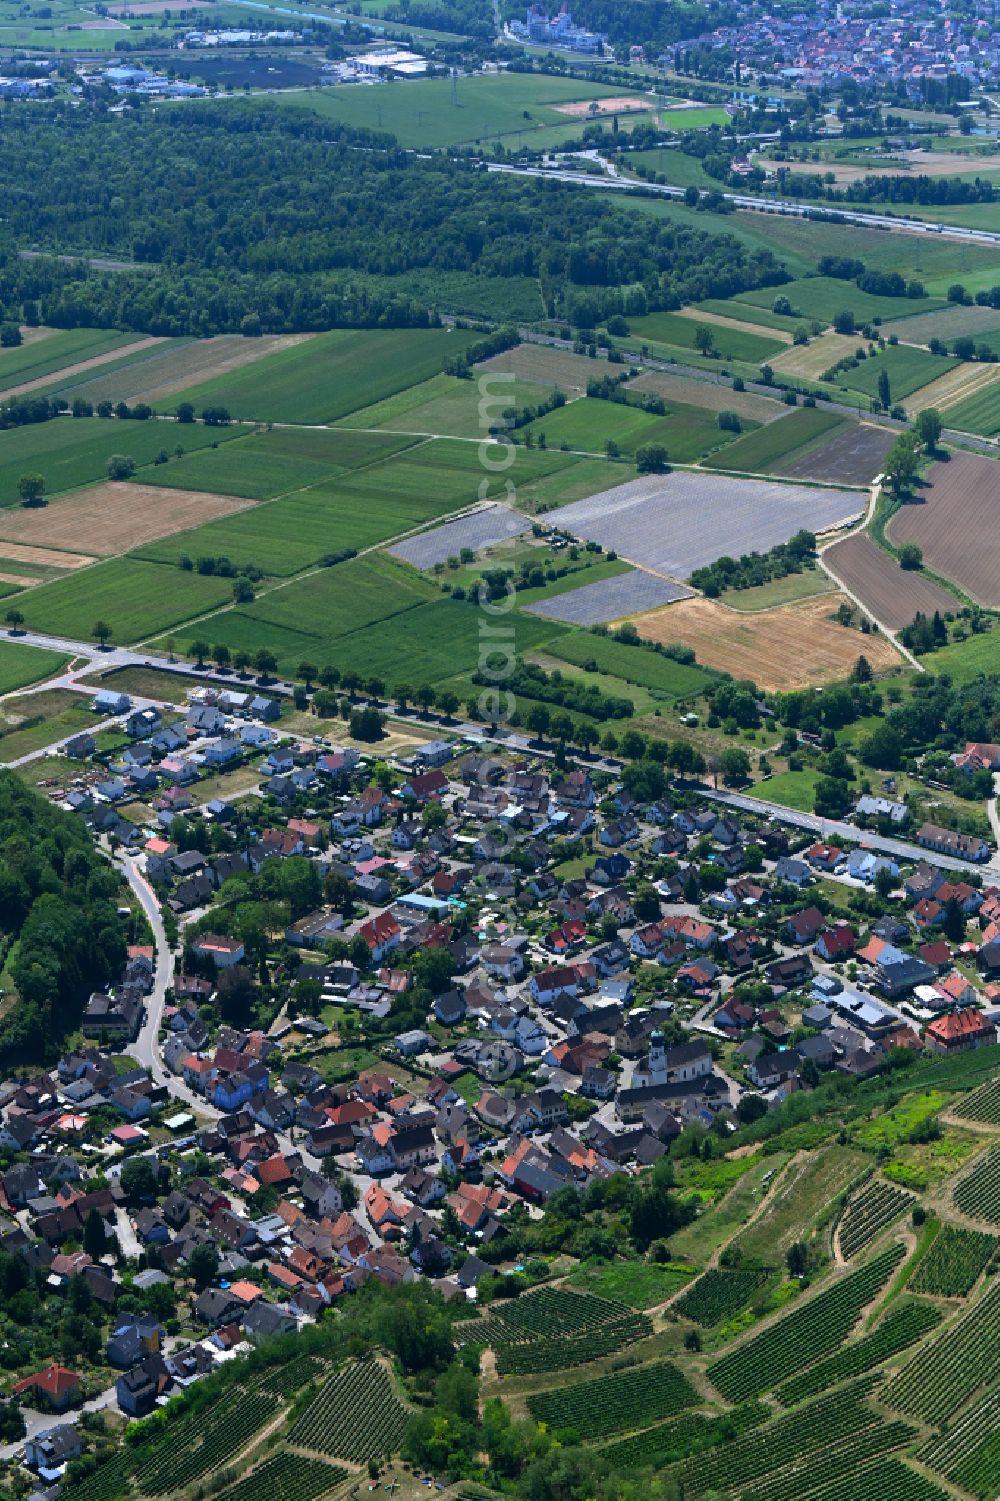 Kenzingen from above - Village view on the edge of agricultural fields and land in Kenzingen in the state Baden-Wuerttemberg, Germany